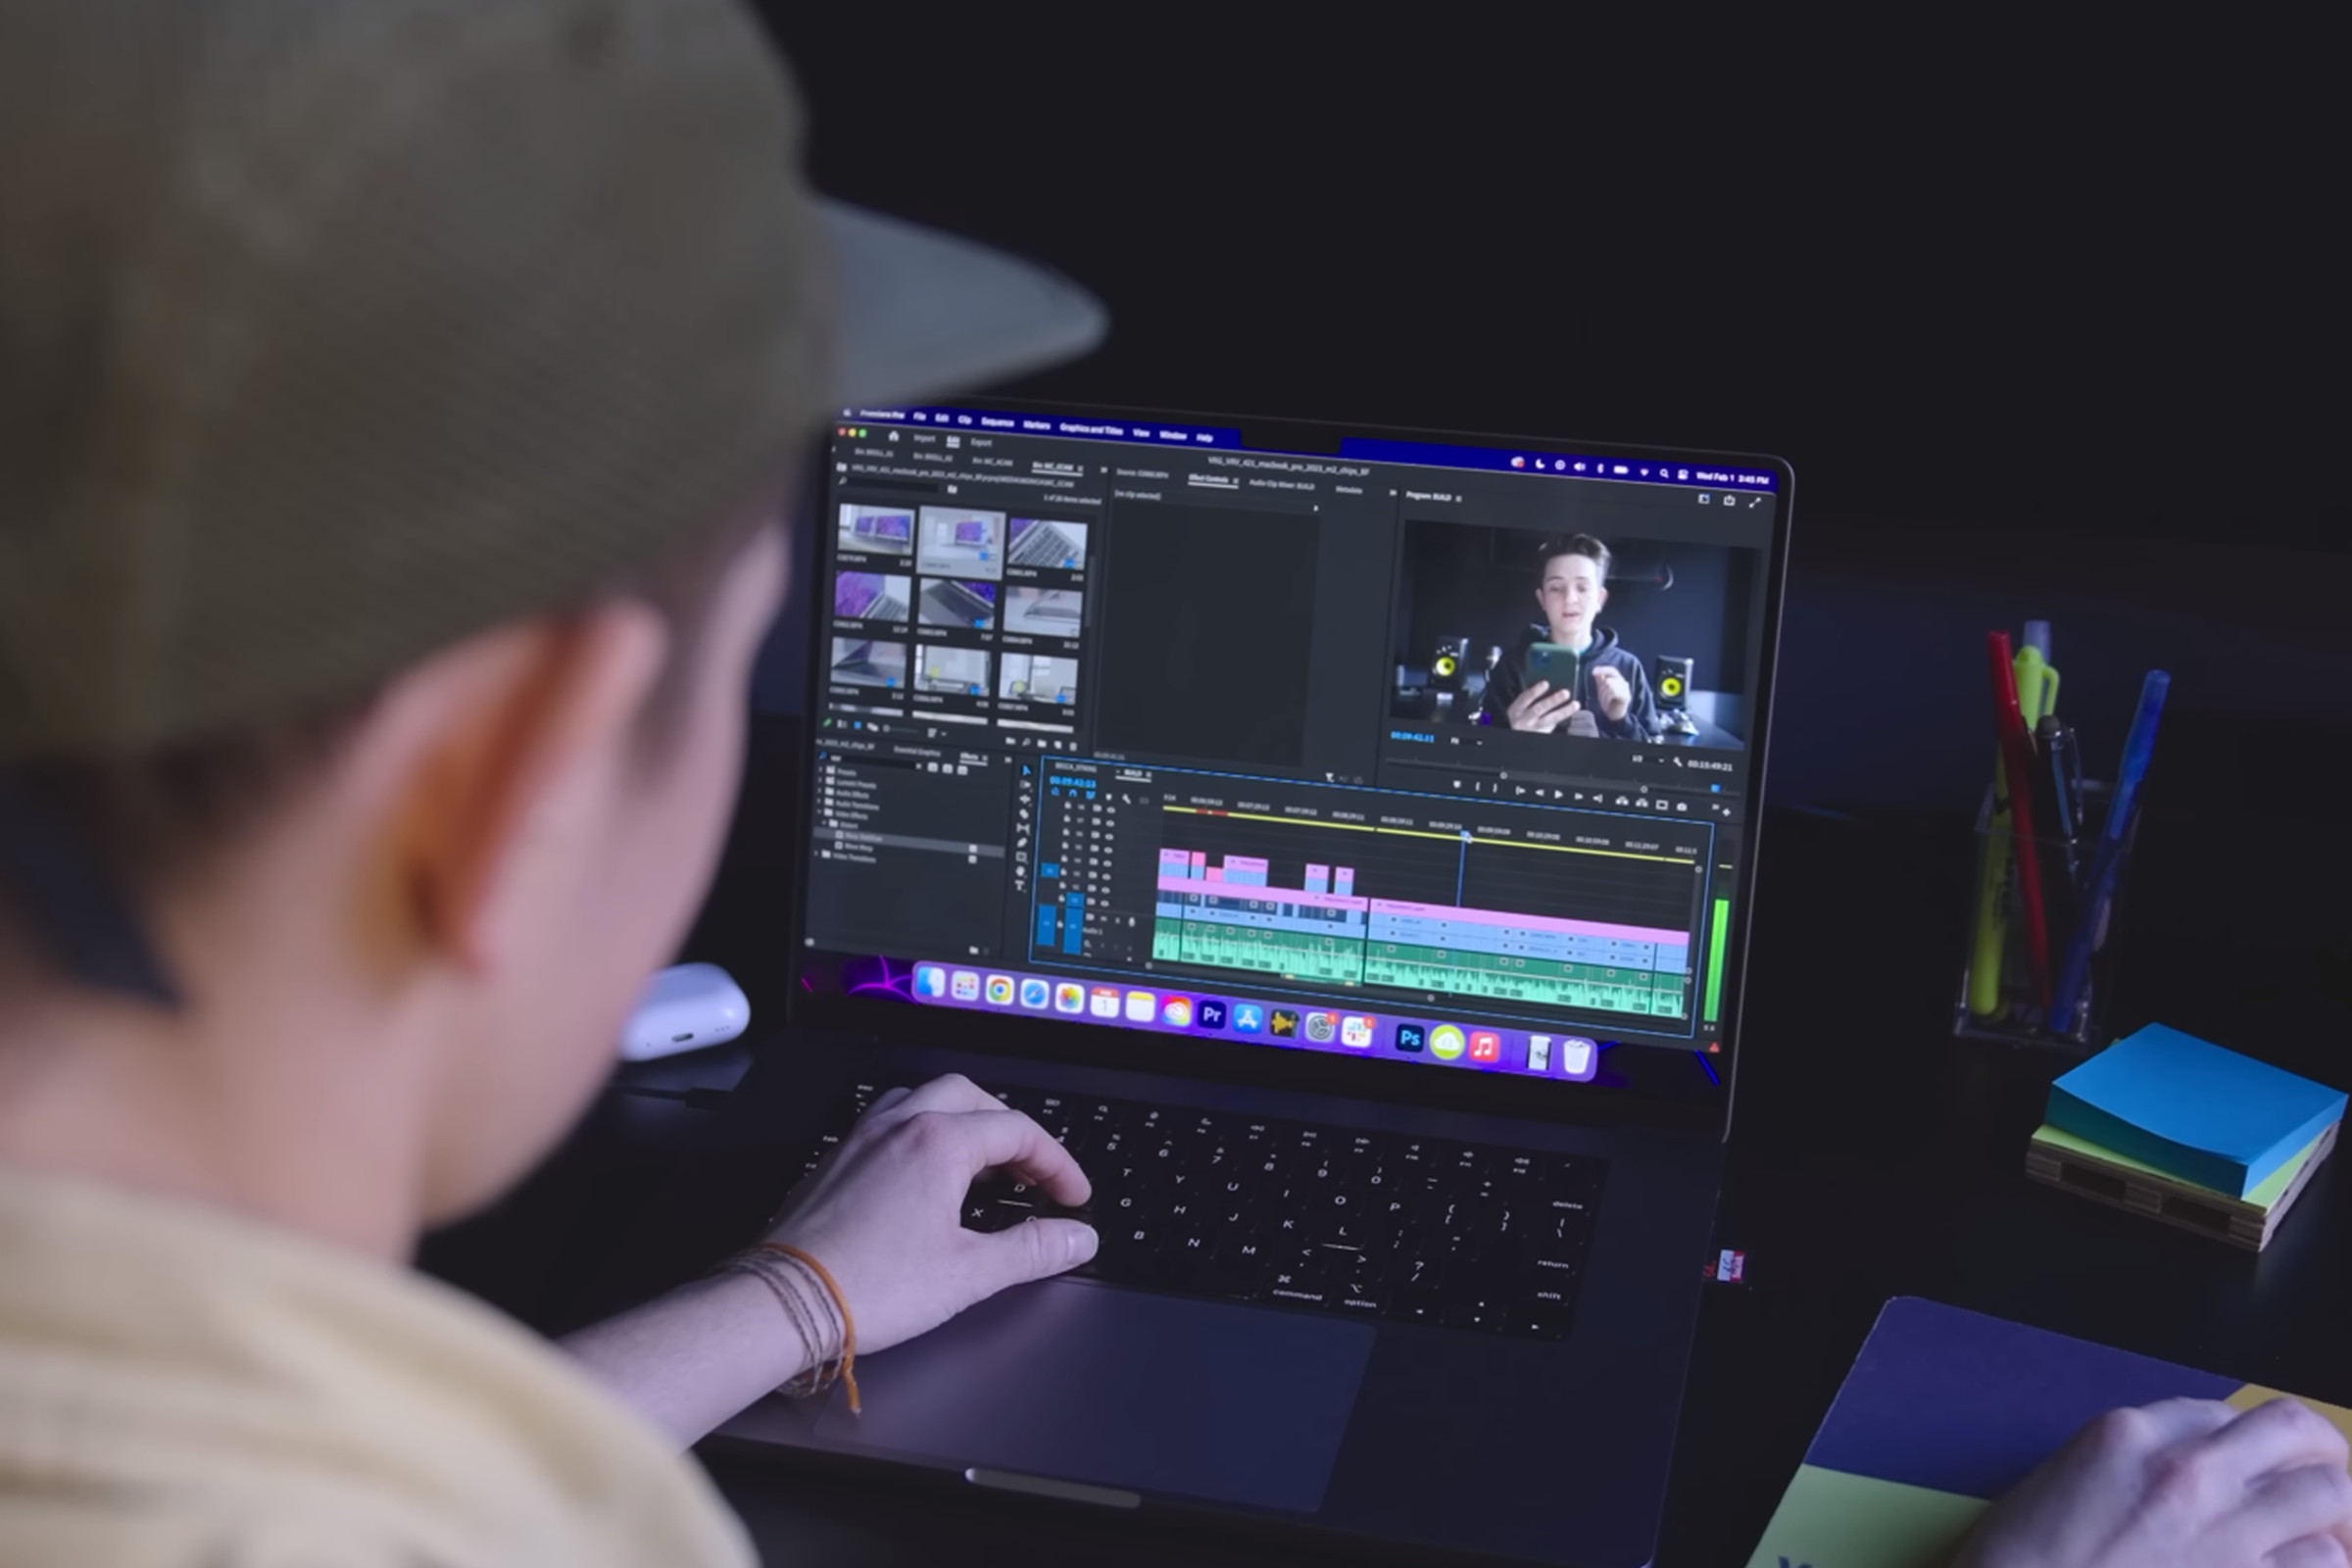 A user edits a video in Premiere Pro on the MacBook Pro 16.